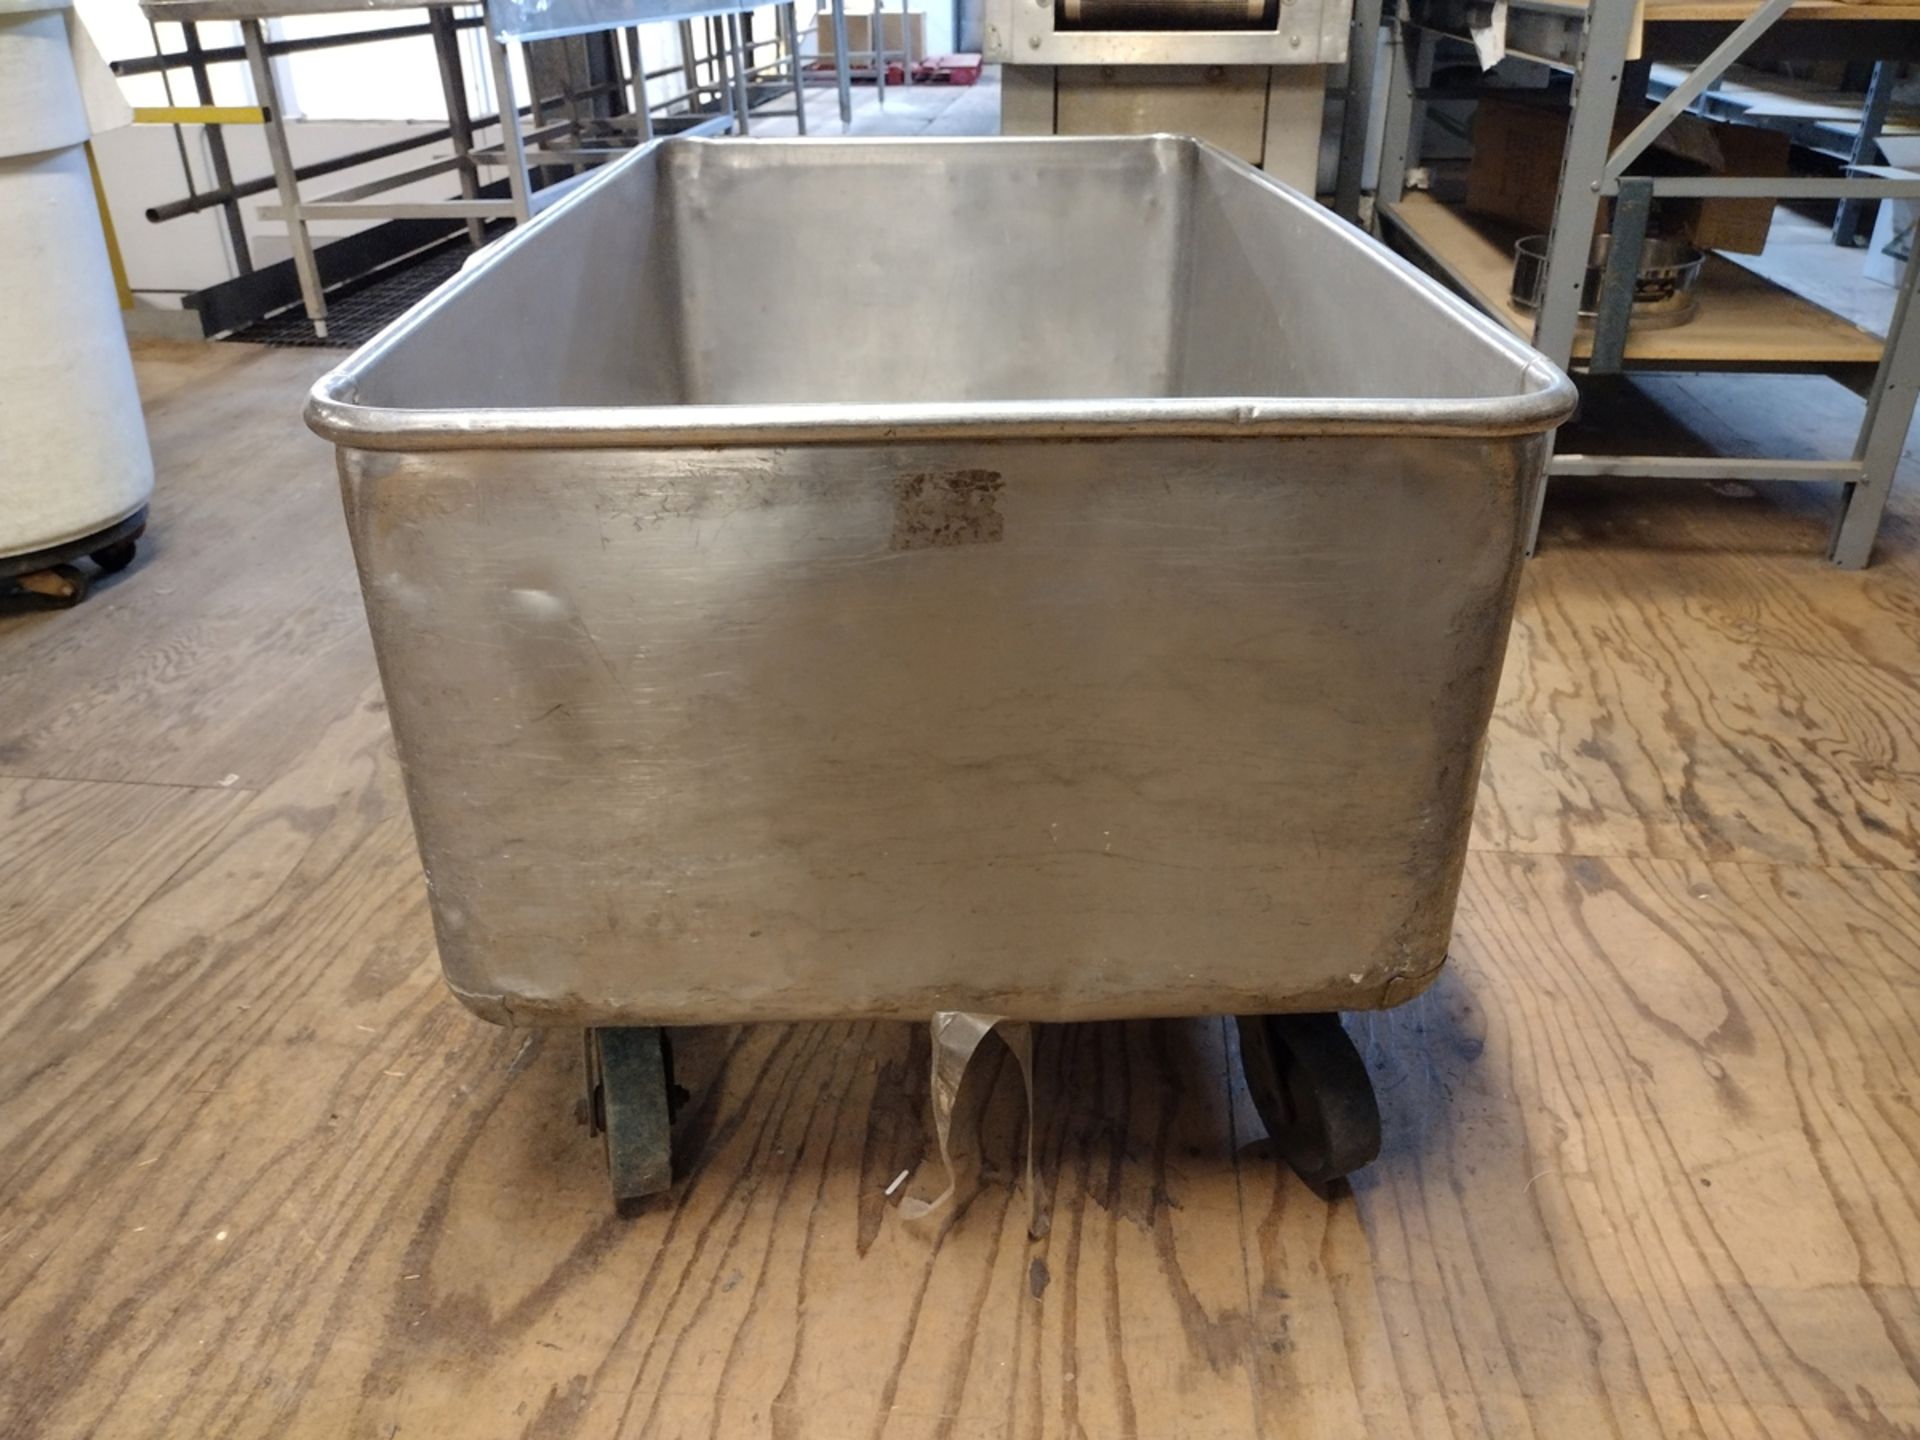 Stainless Steel Rolling Bin with Drain - Image 3 of 4